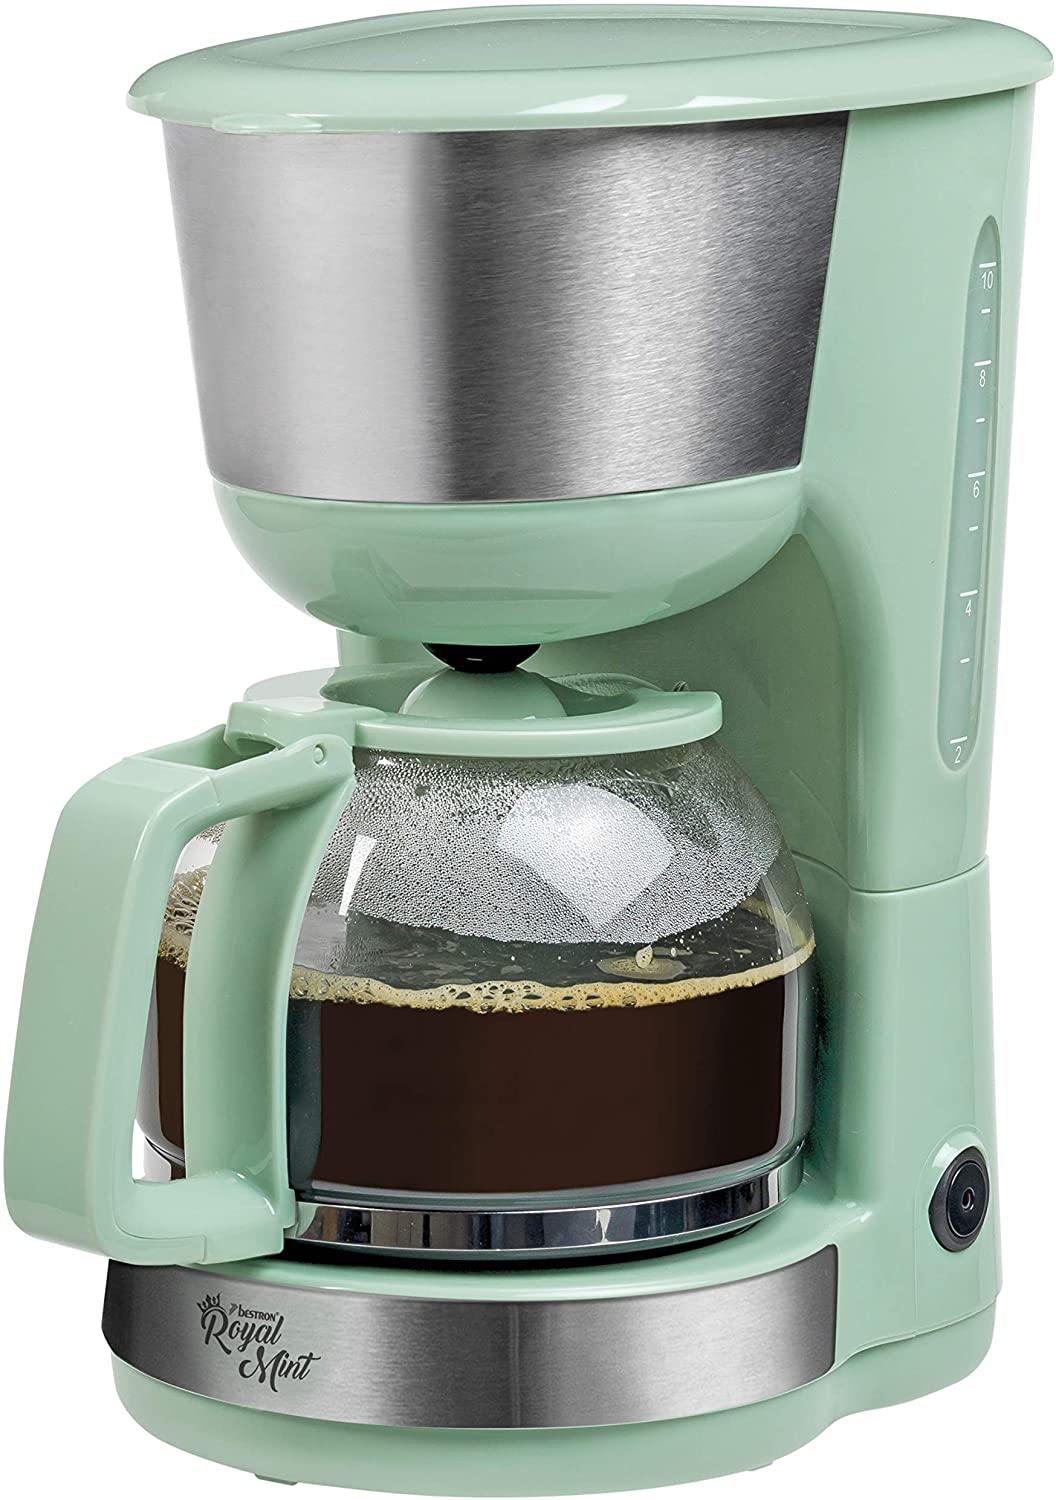 Bestron Royal Mint Coffee Maker with Warming Plate for Ground Filter Coffee, 10 Cups, 1000 Watt, Mint Green